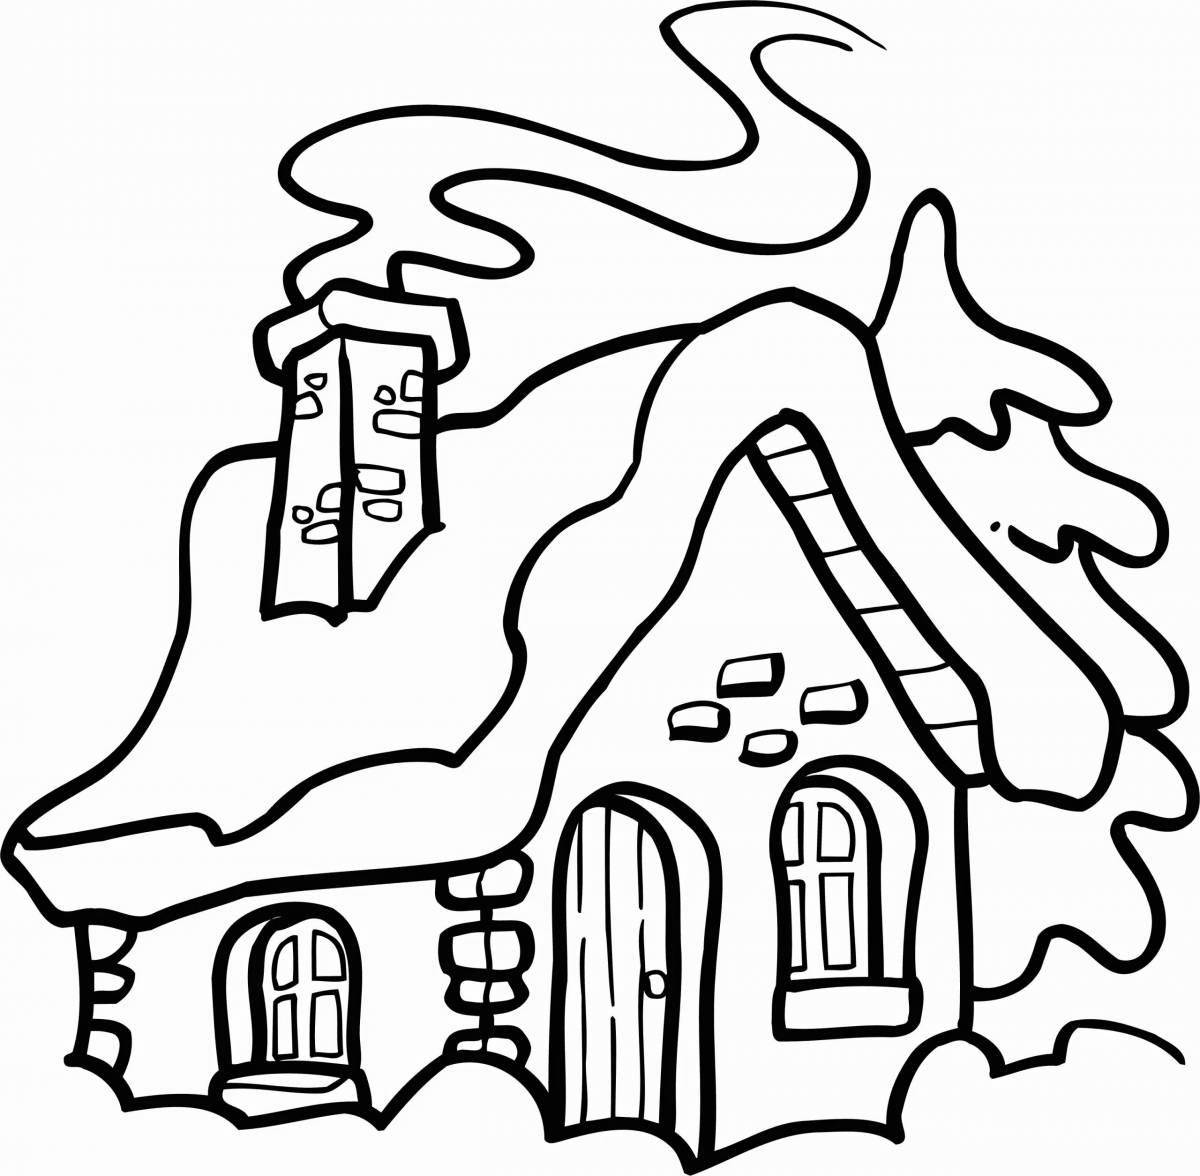 Fantastic winter house coloring book for kids